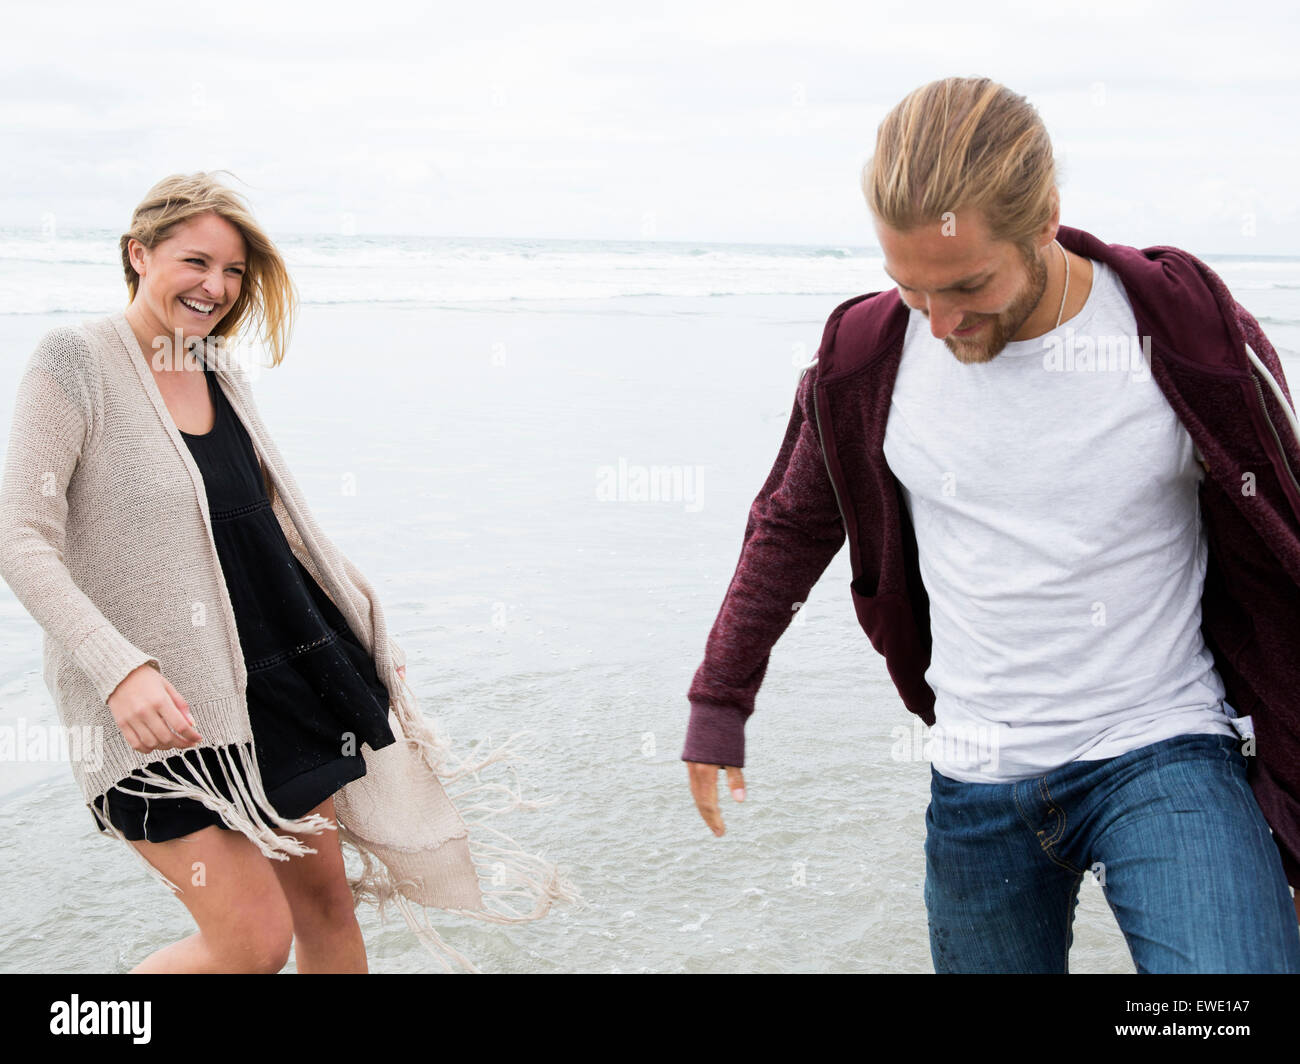 Young man and young woman walking on a beach, smiling Stock Photo